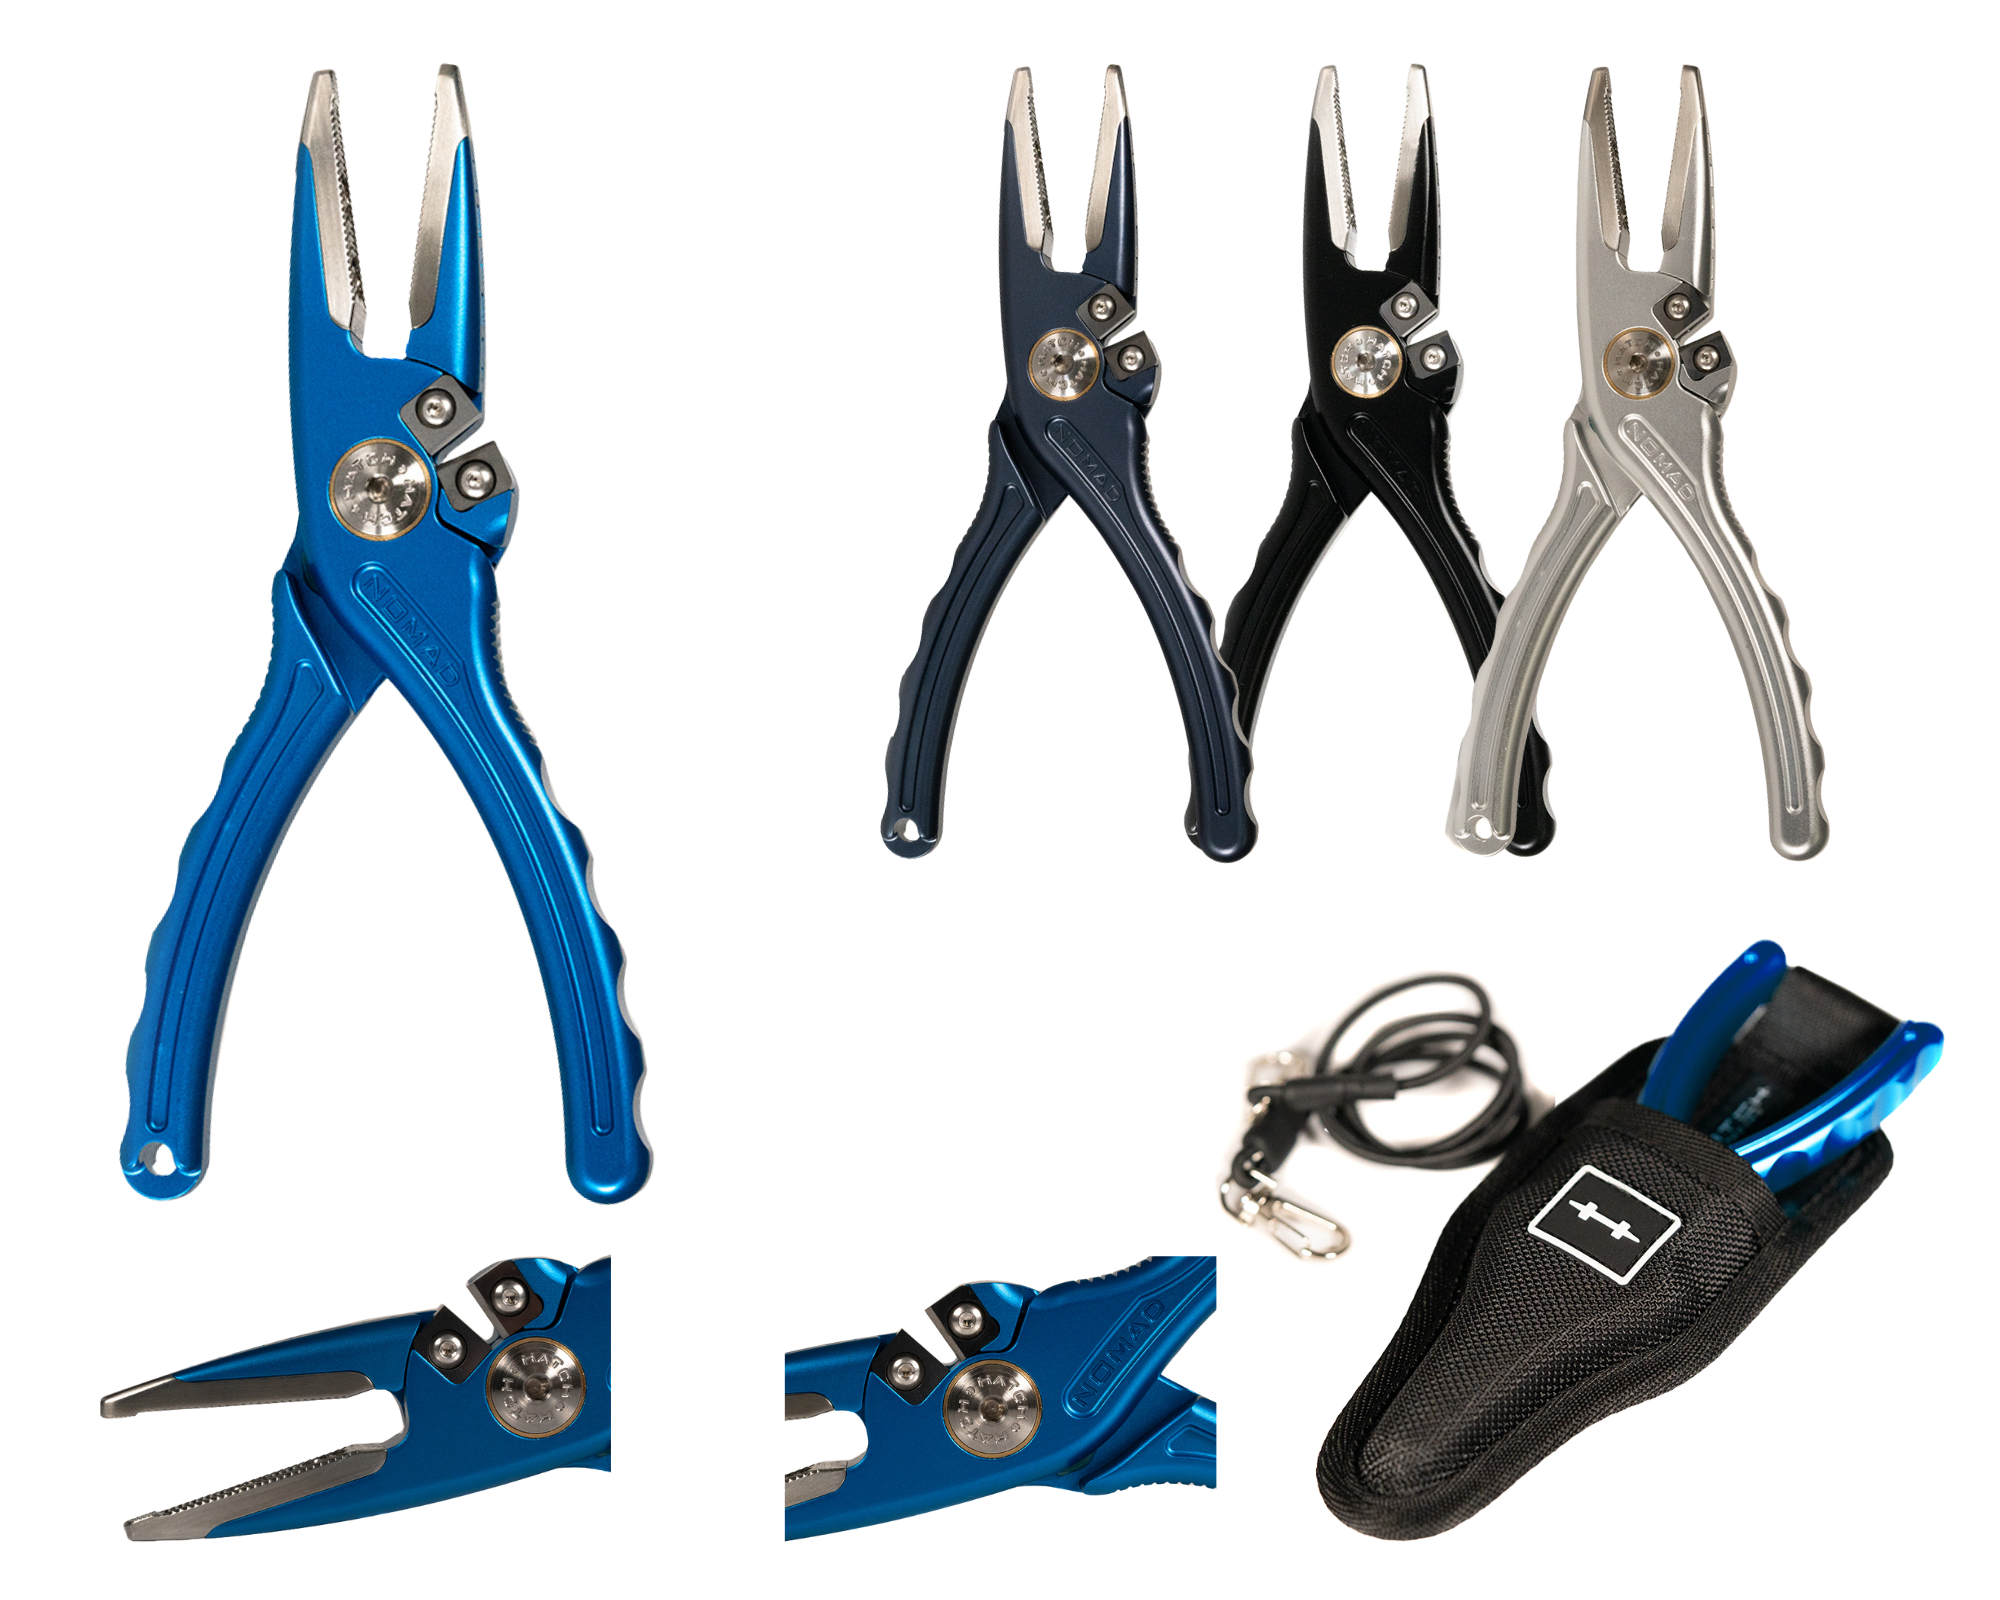 Hatch Nomad Pliers 2 - Urban Angler